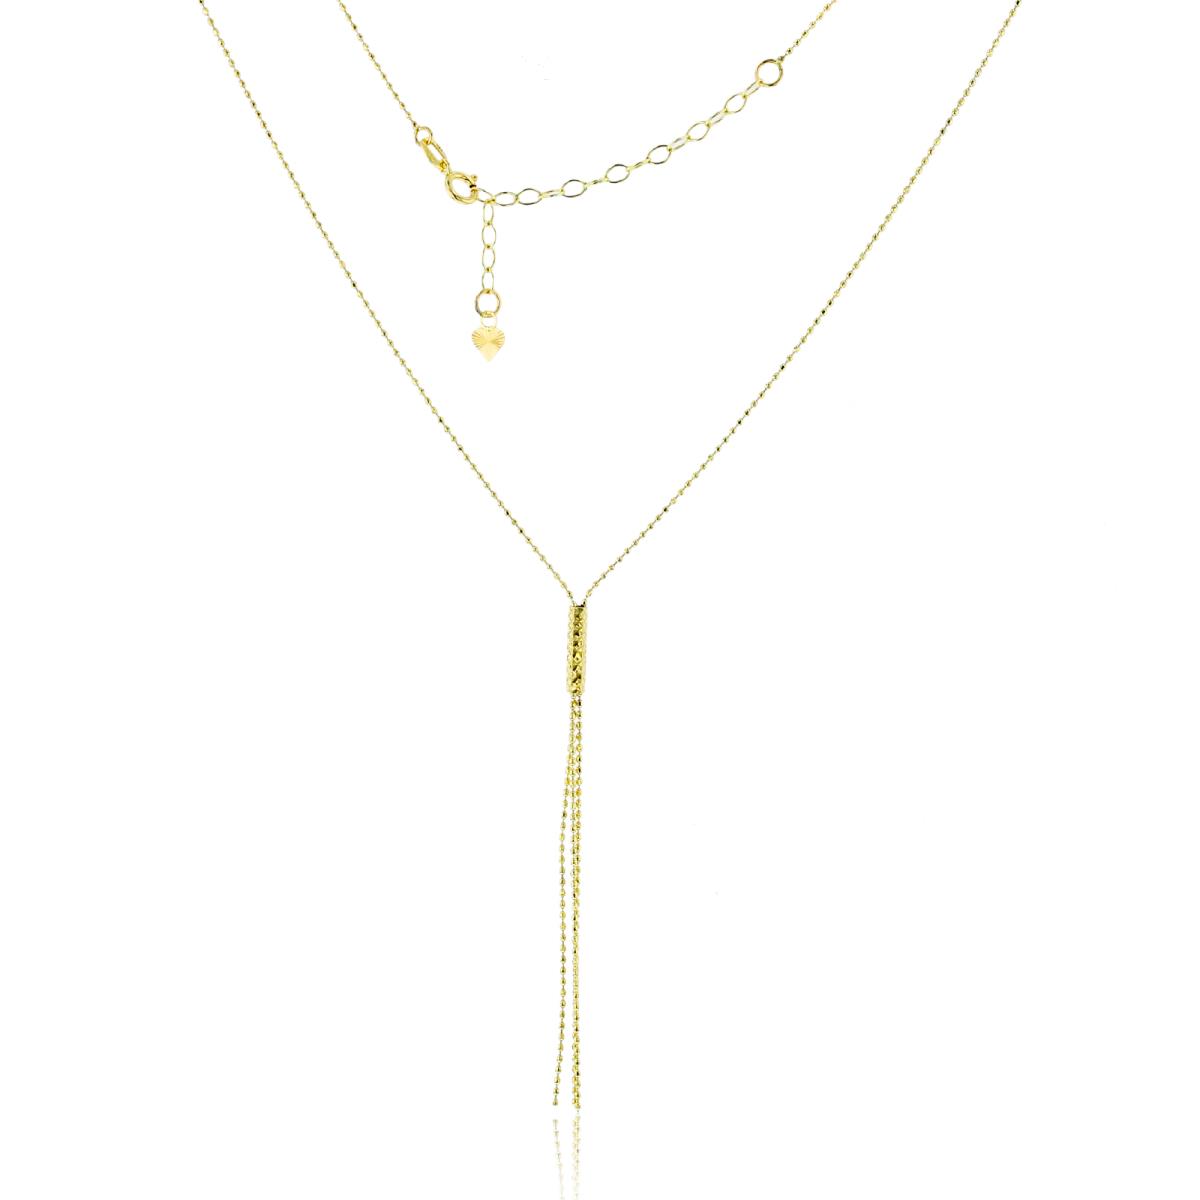 14K Yellow Gold Beaded Chain with DC Tube & Bead Chain Tassel 18" Necklace